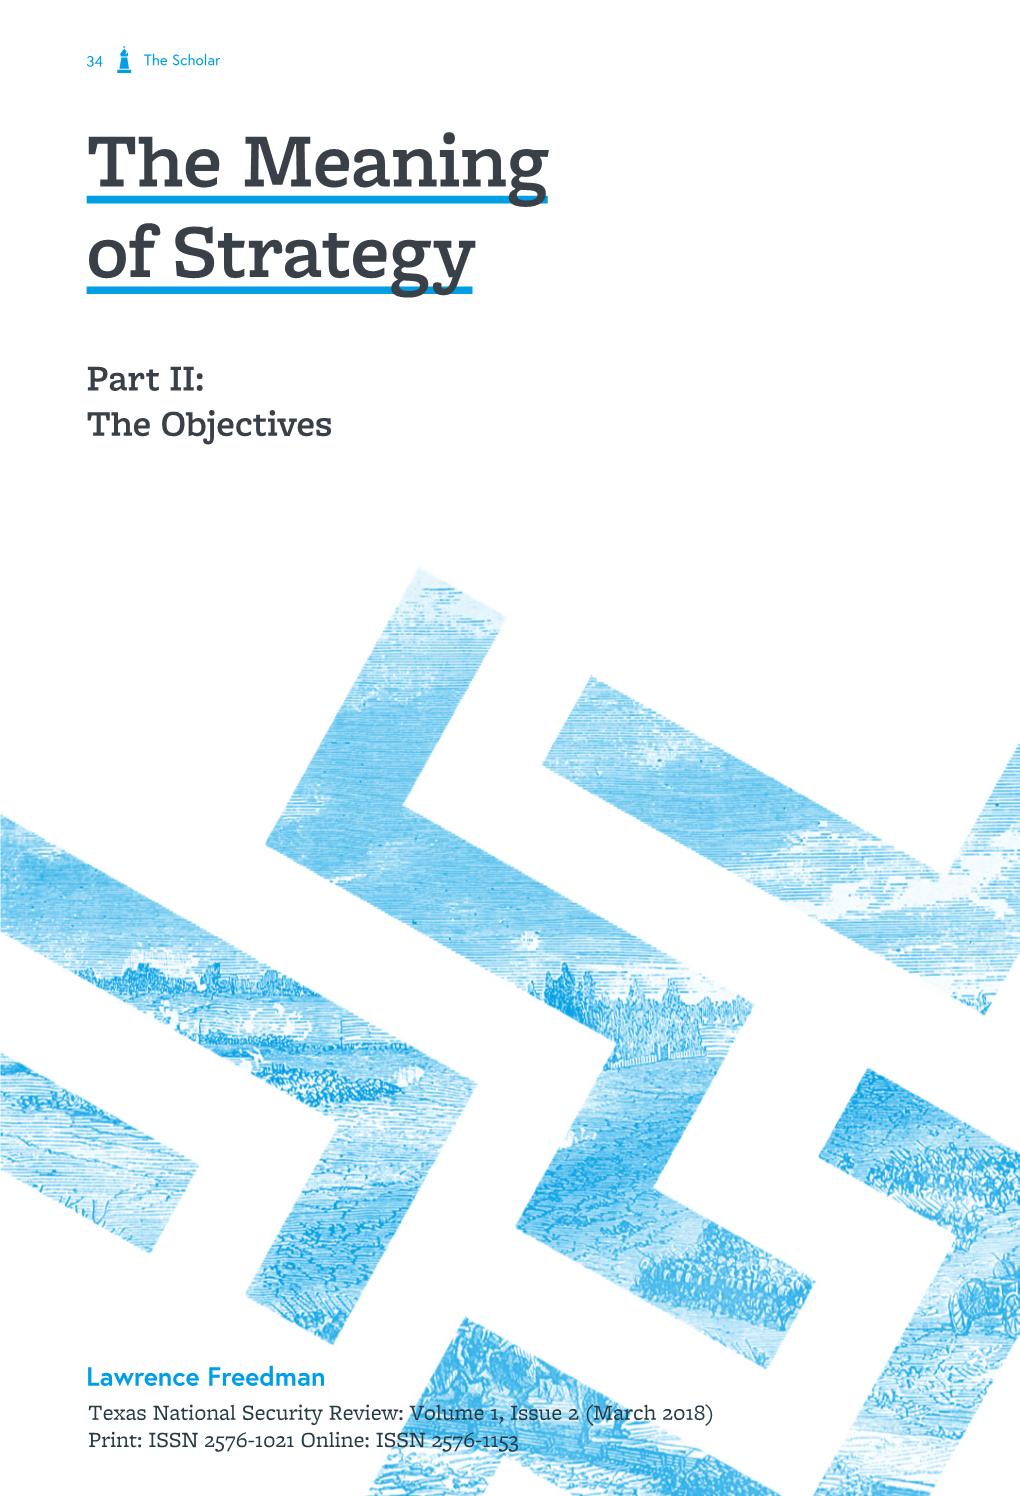 The Meaning of Strategy